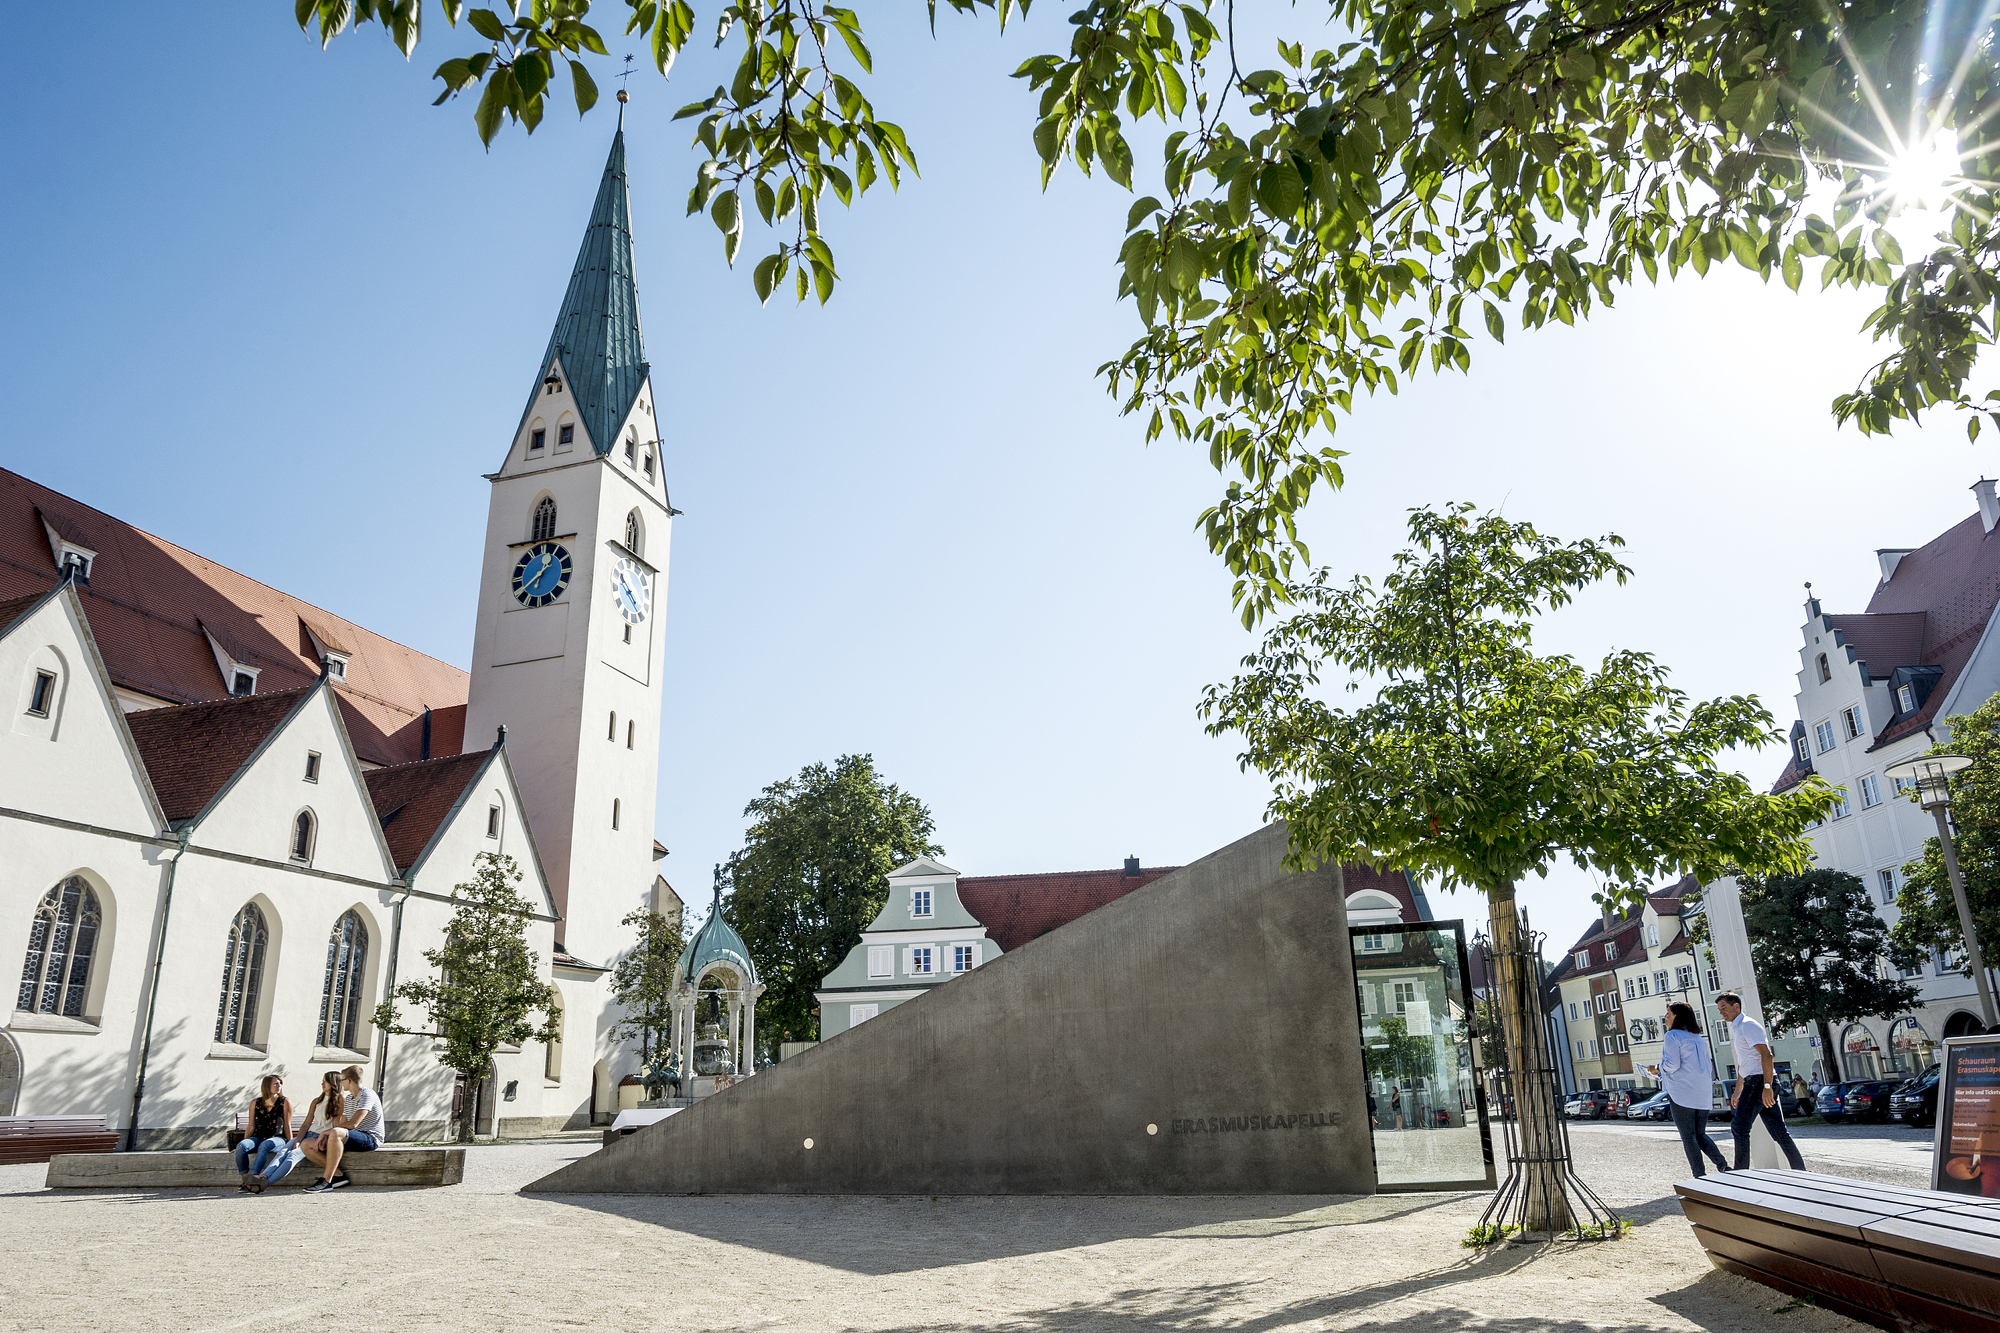 Church of St. Mang, one of the top sights in Kempten